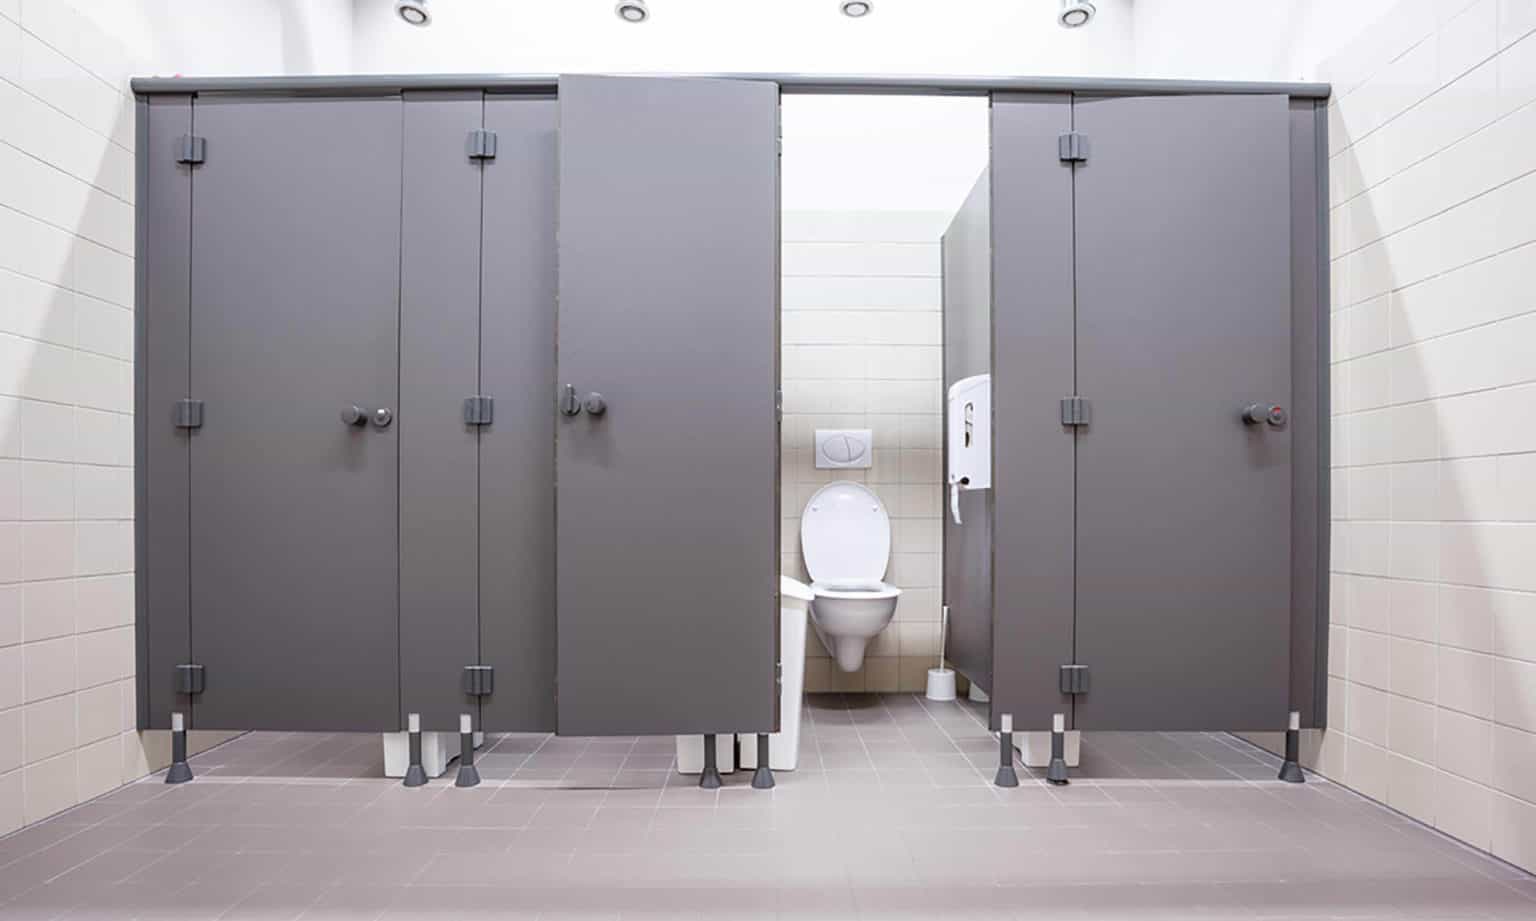 How To Install Bathroom Stalls 1536x921 